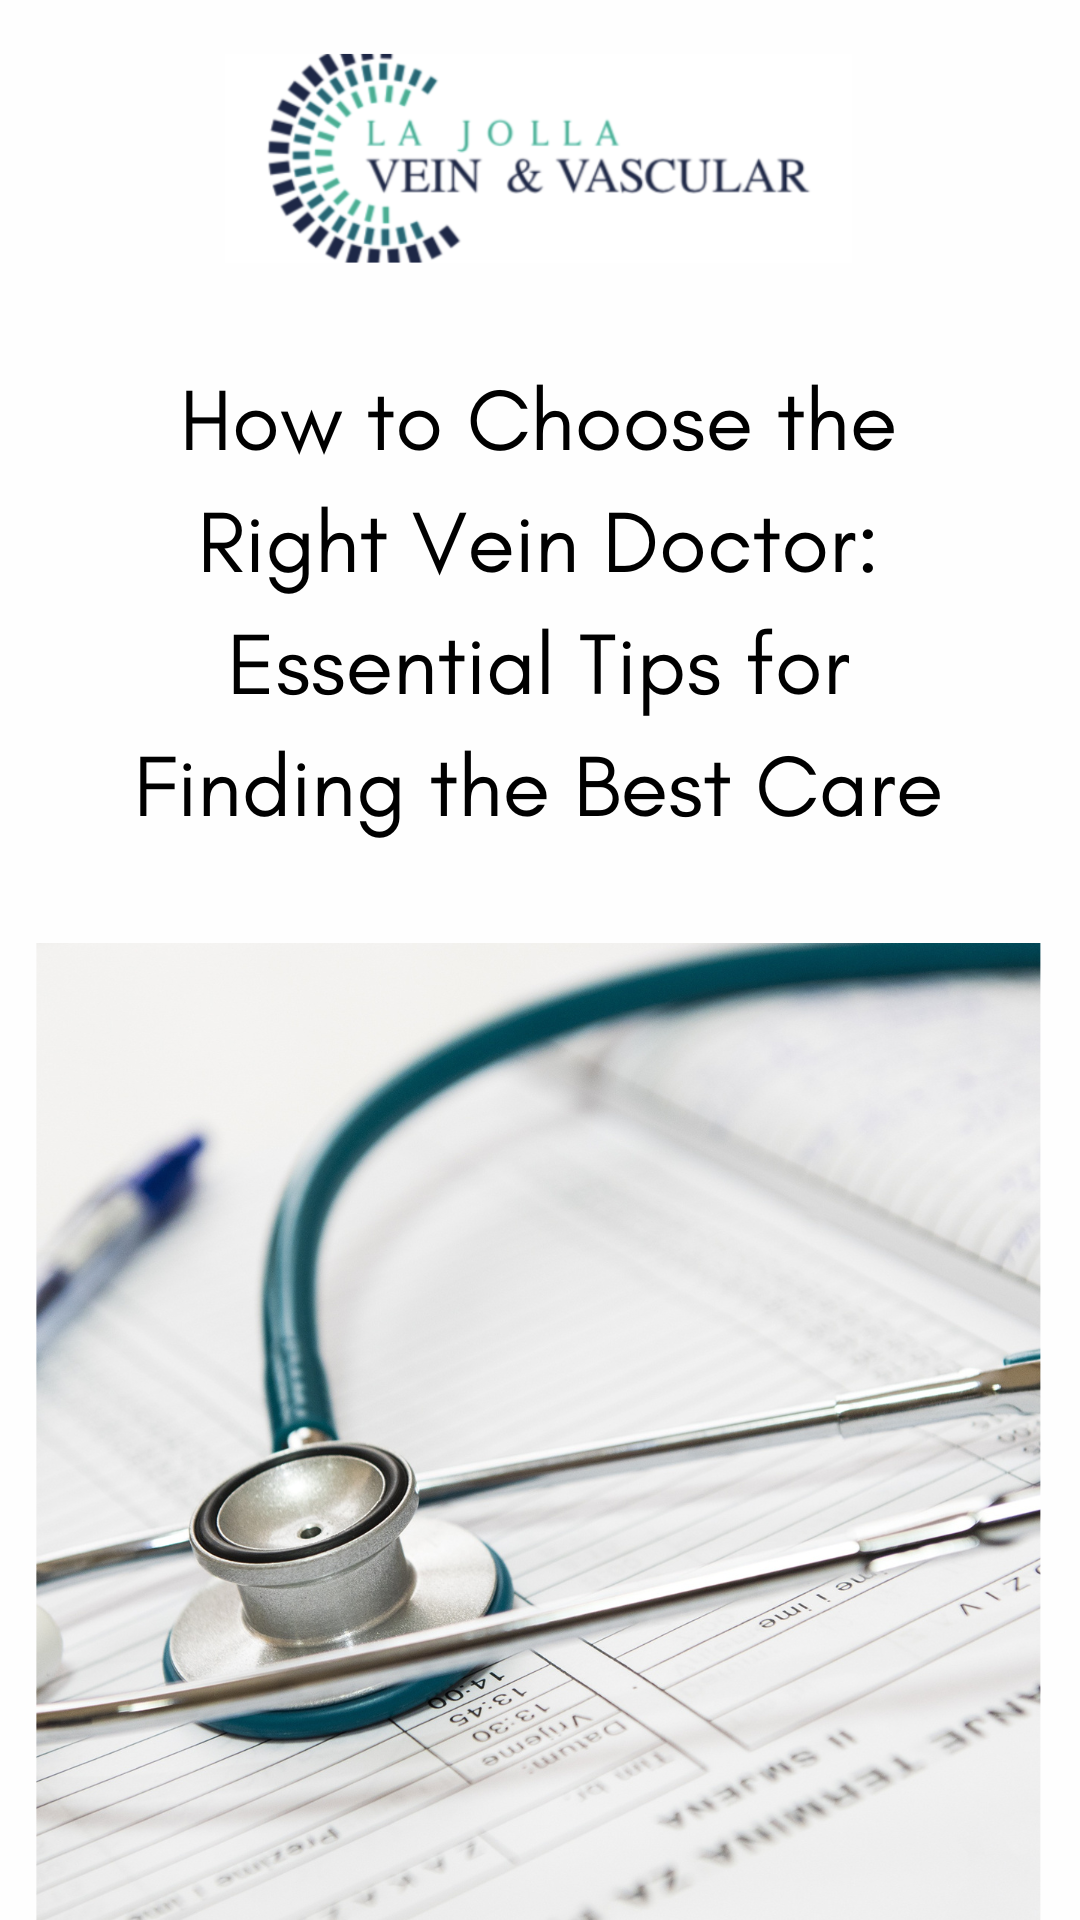 How to Choose the Right Vein Doctor | Finding the Best Vein Care